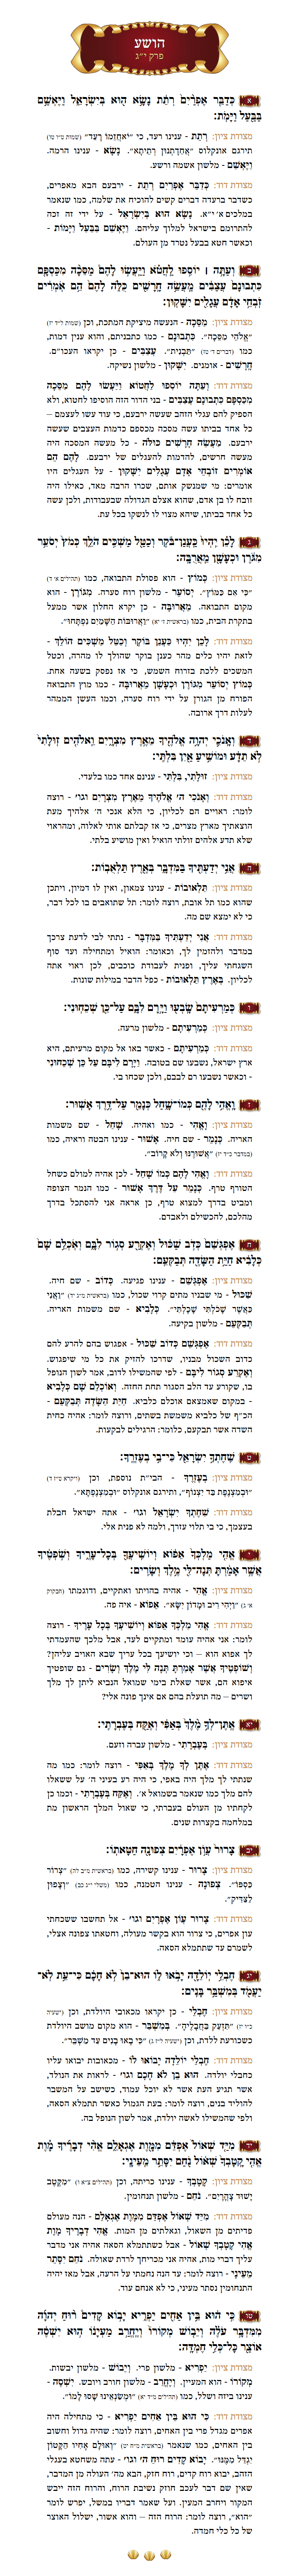 Sefer Hoshea Chapter 13 with commentary